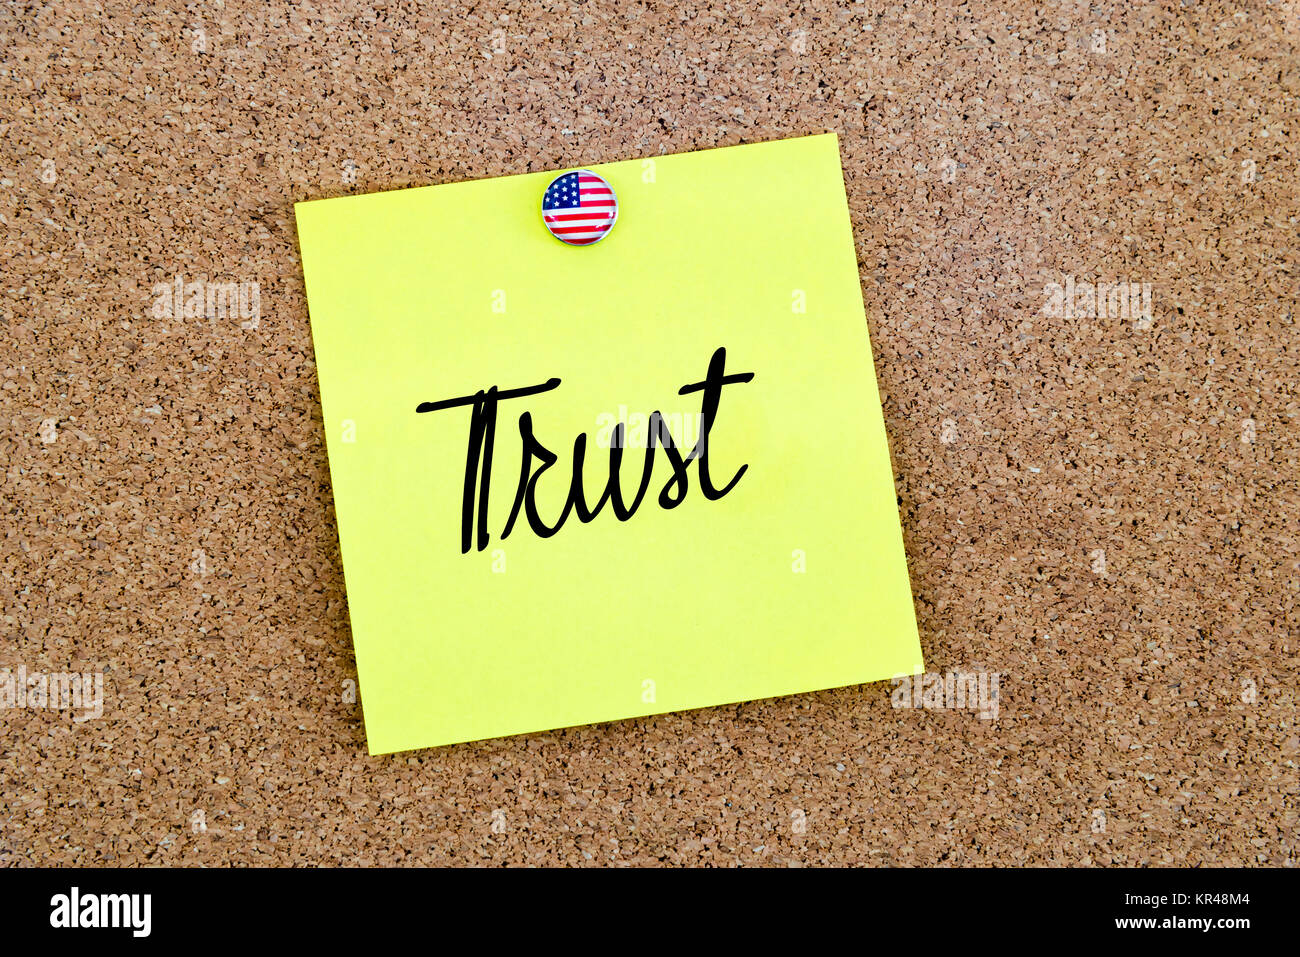 Written text Trust over yellow paper note Stock Photo